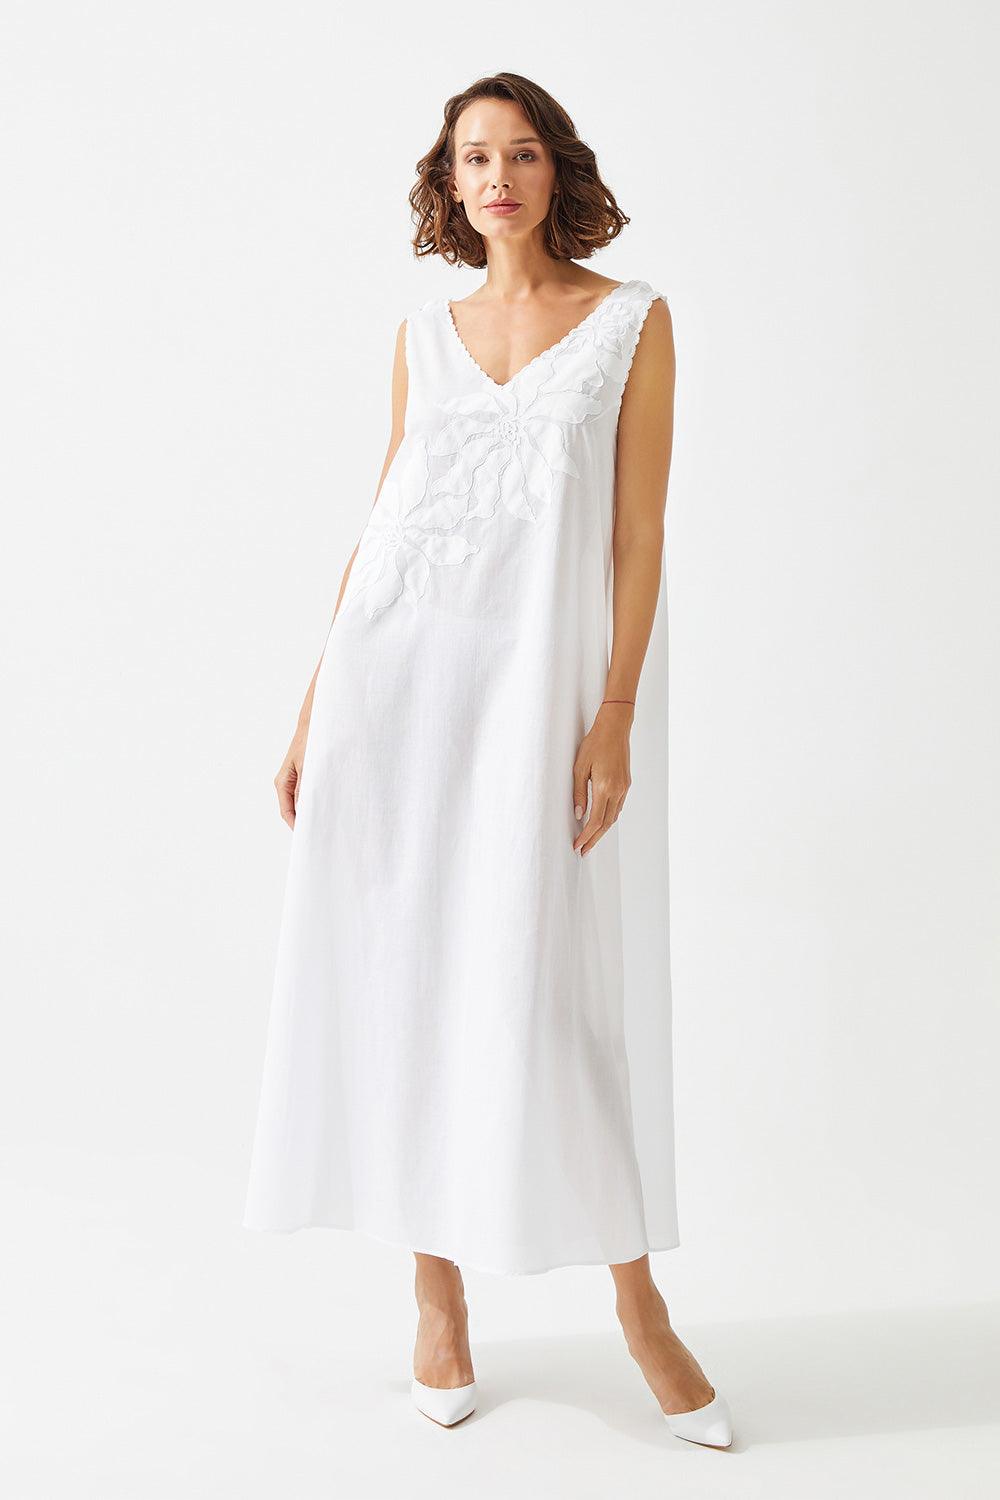 Aila Long Cotton Embroidered with Lace V Neck Nightgown - Off White